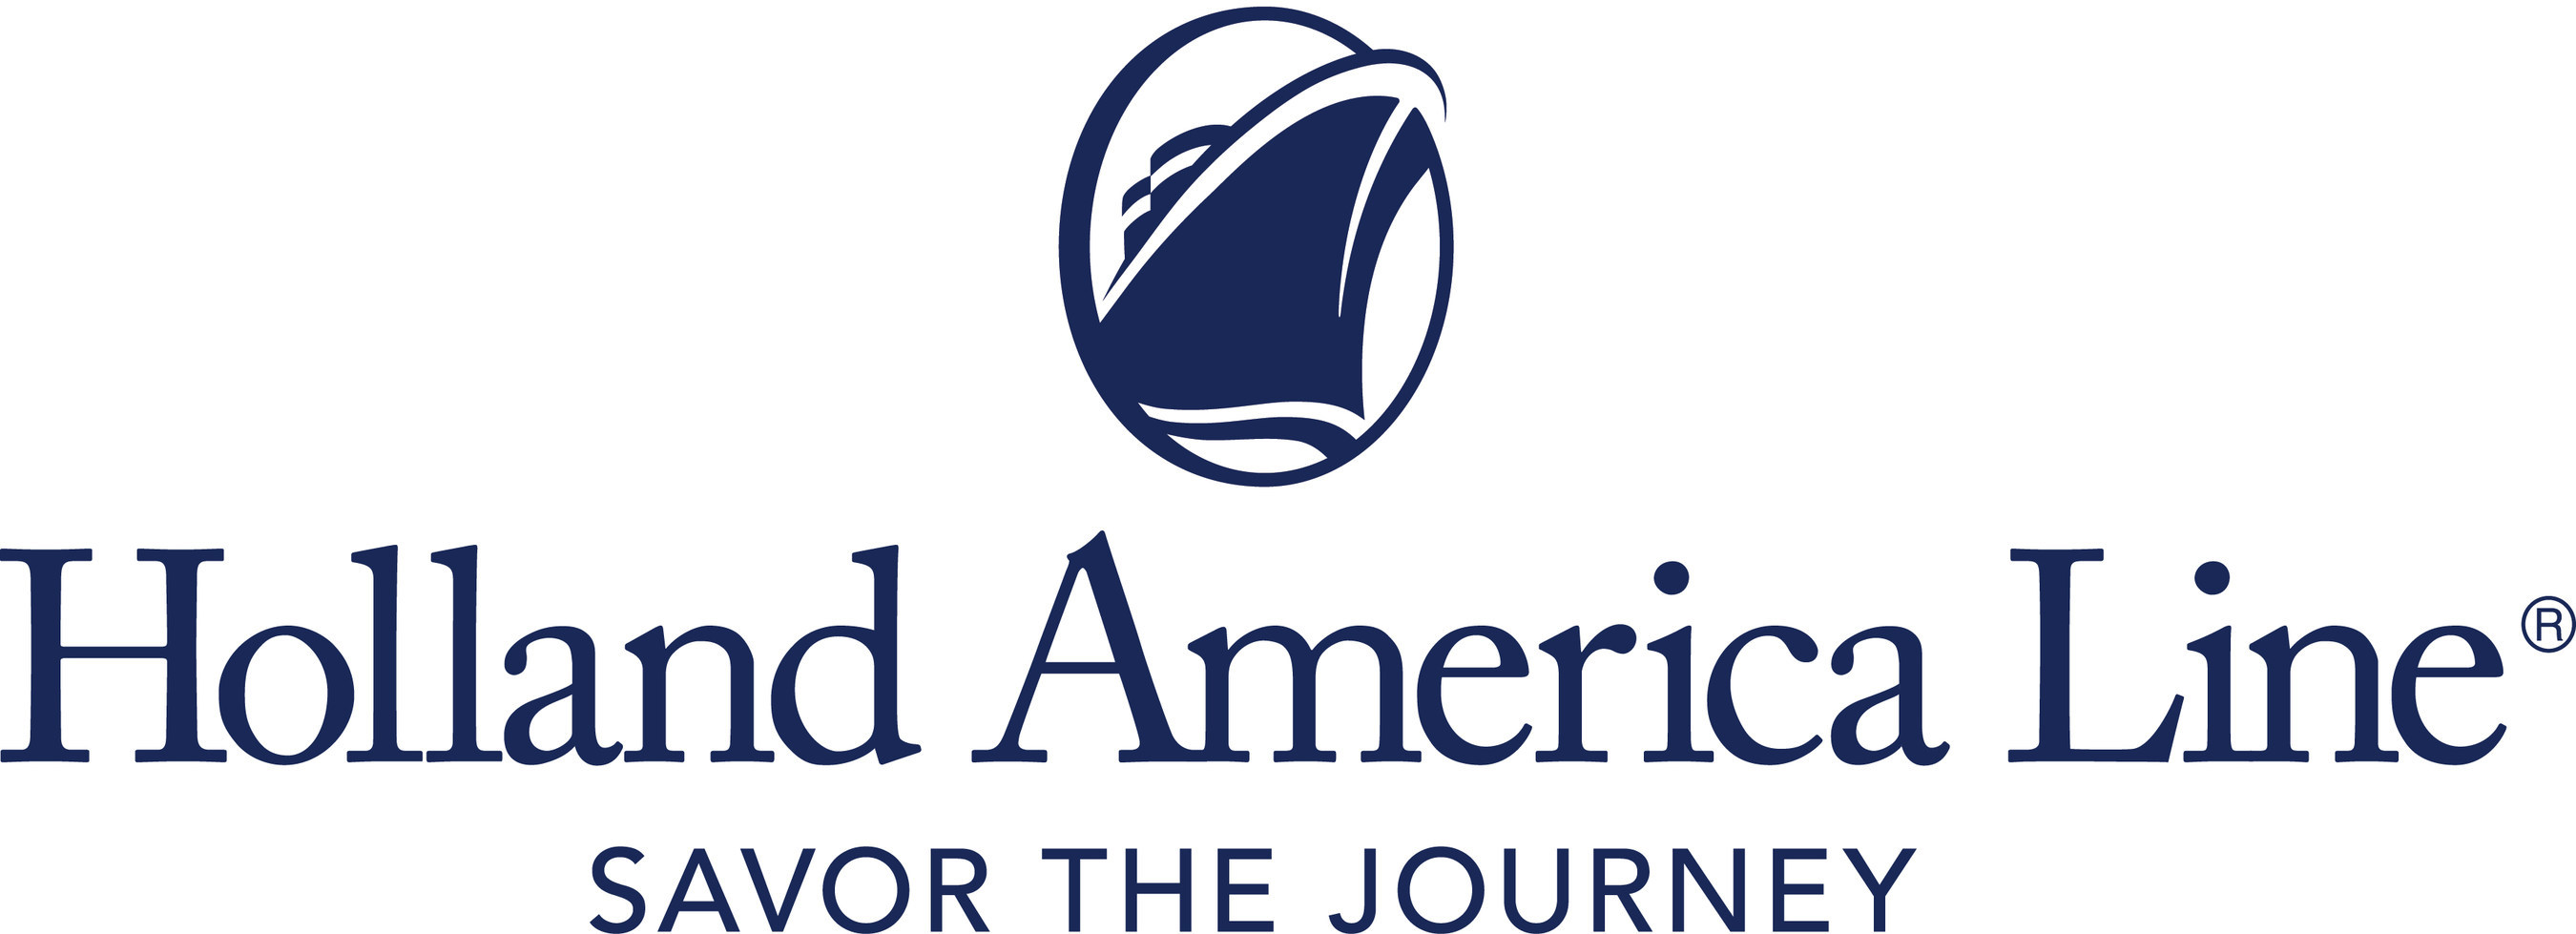 Holland America Amex Offer Spend $750 or more, get $300 in statement credits